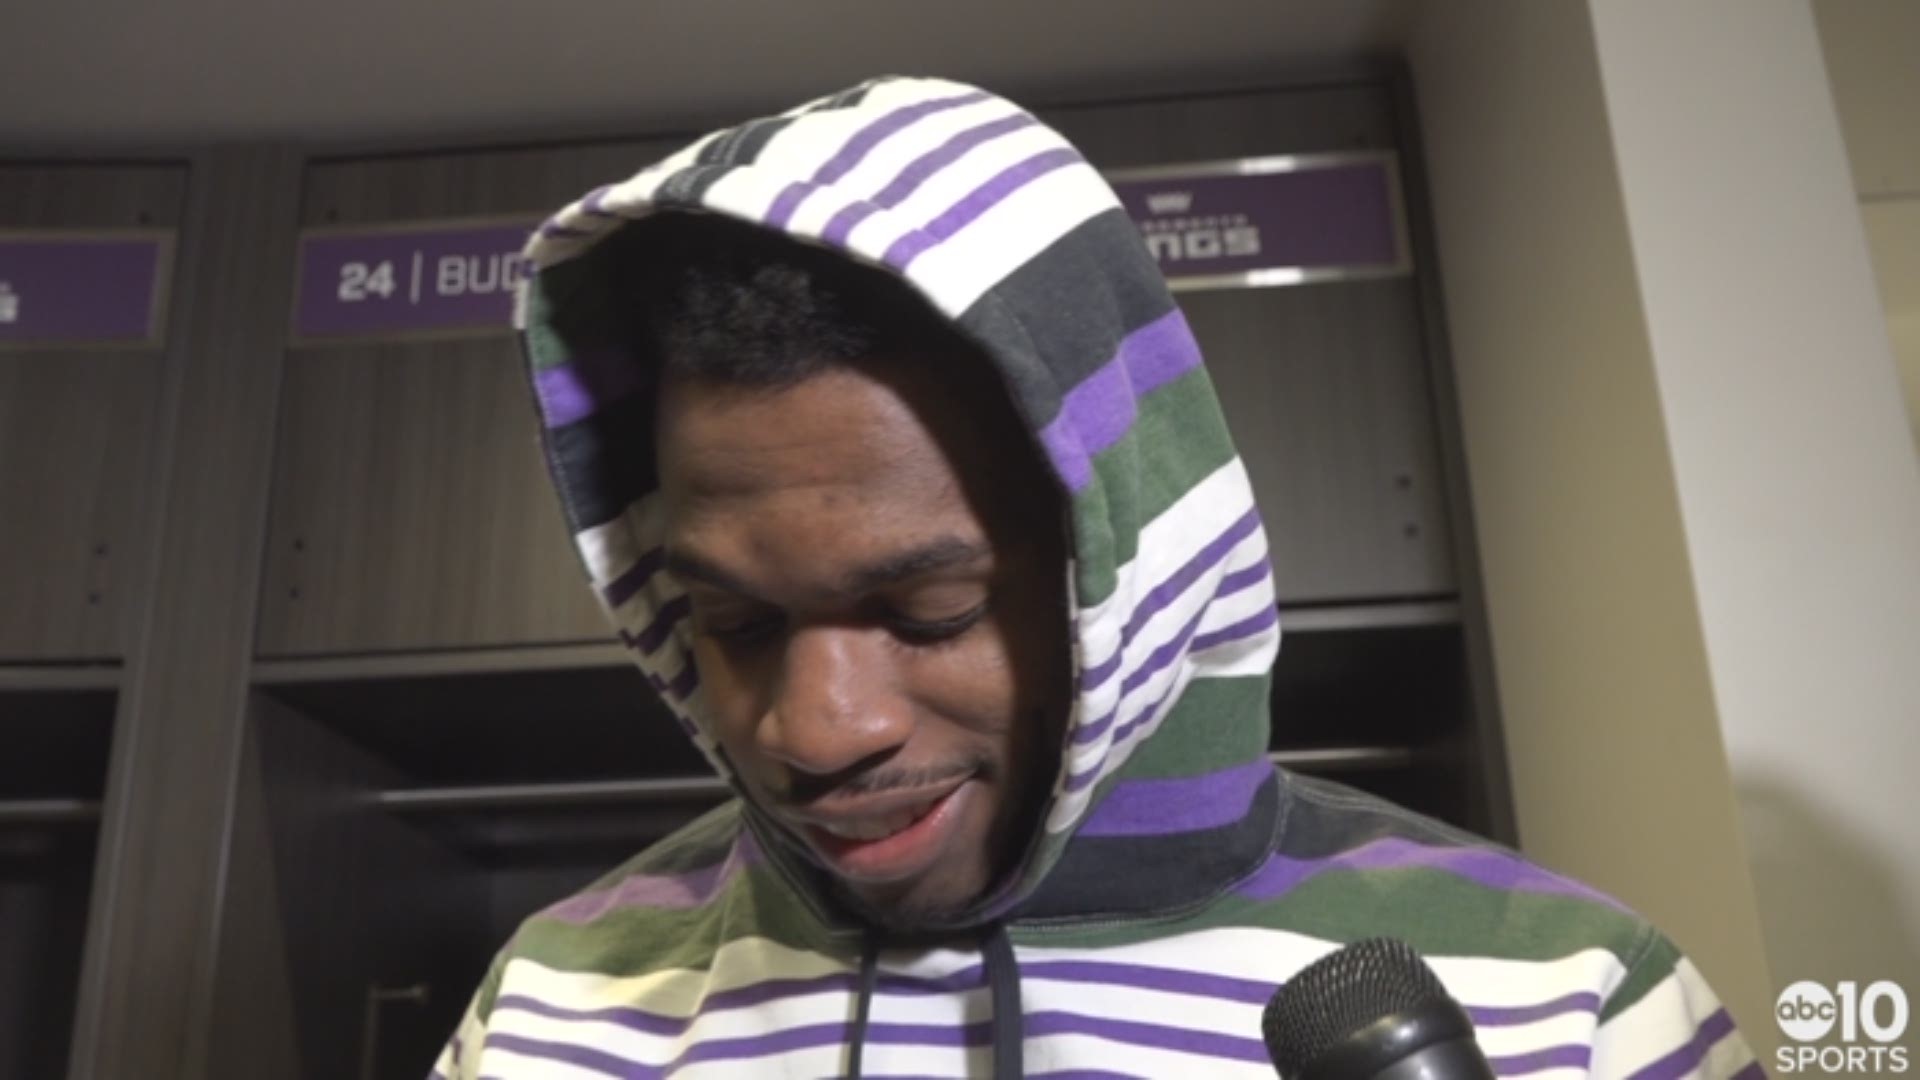 Buddy Hield talks about the two trades the Kings made on Wednesday, shipping out Iman Shumpert, Justin Jackson and Zach Randolph for Alec Burks and Harrison Barnes. He talks about the impact those players had on the team, how the trade impacted Wednesday's game with the Houston Rockets and focusing on being a professional.